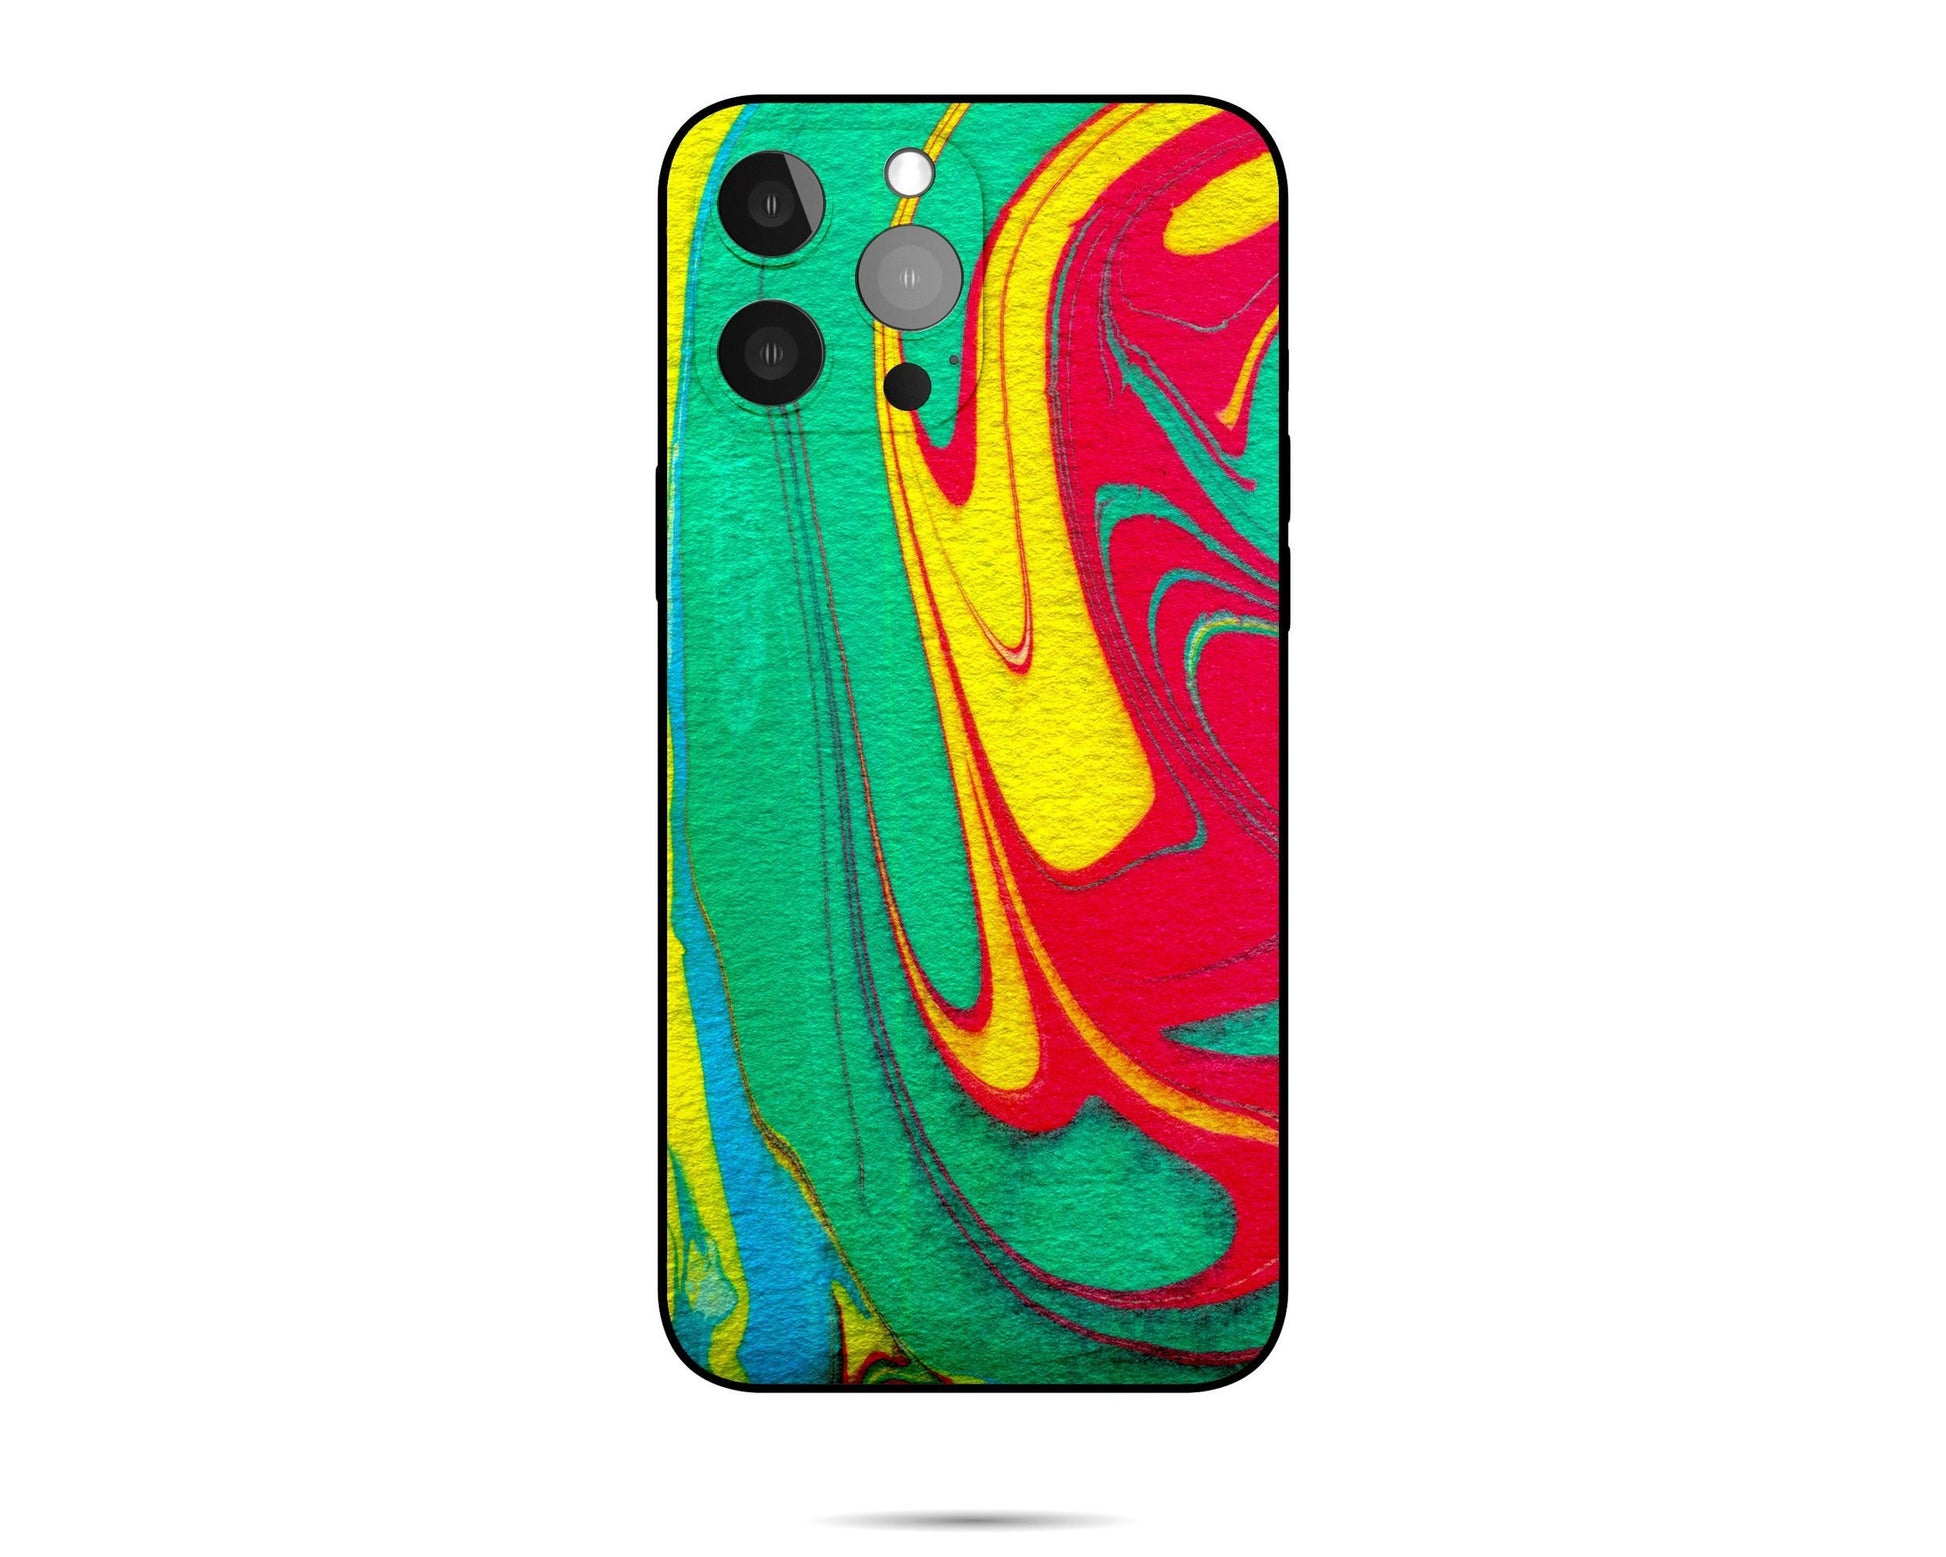 Abstract Art Iphone 14 Pro Max Case, Iphone 12 Pro Case, Iphone Xs Max, Iphone 8 Plus Case Art, Iphone Protective Case, Iphone Case Matte